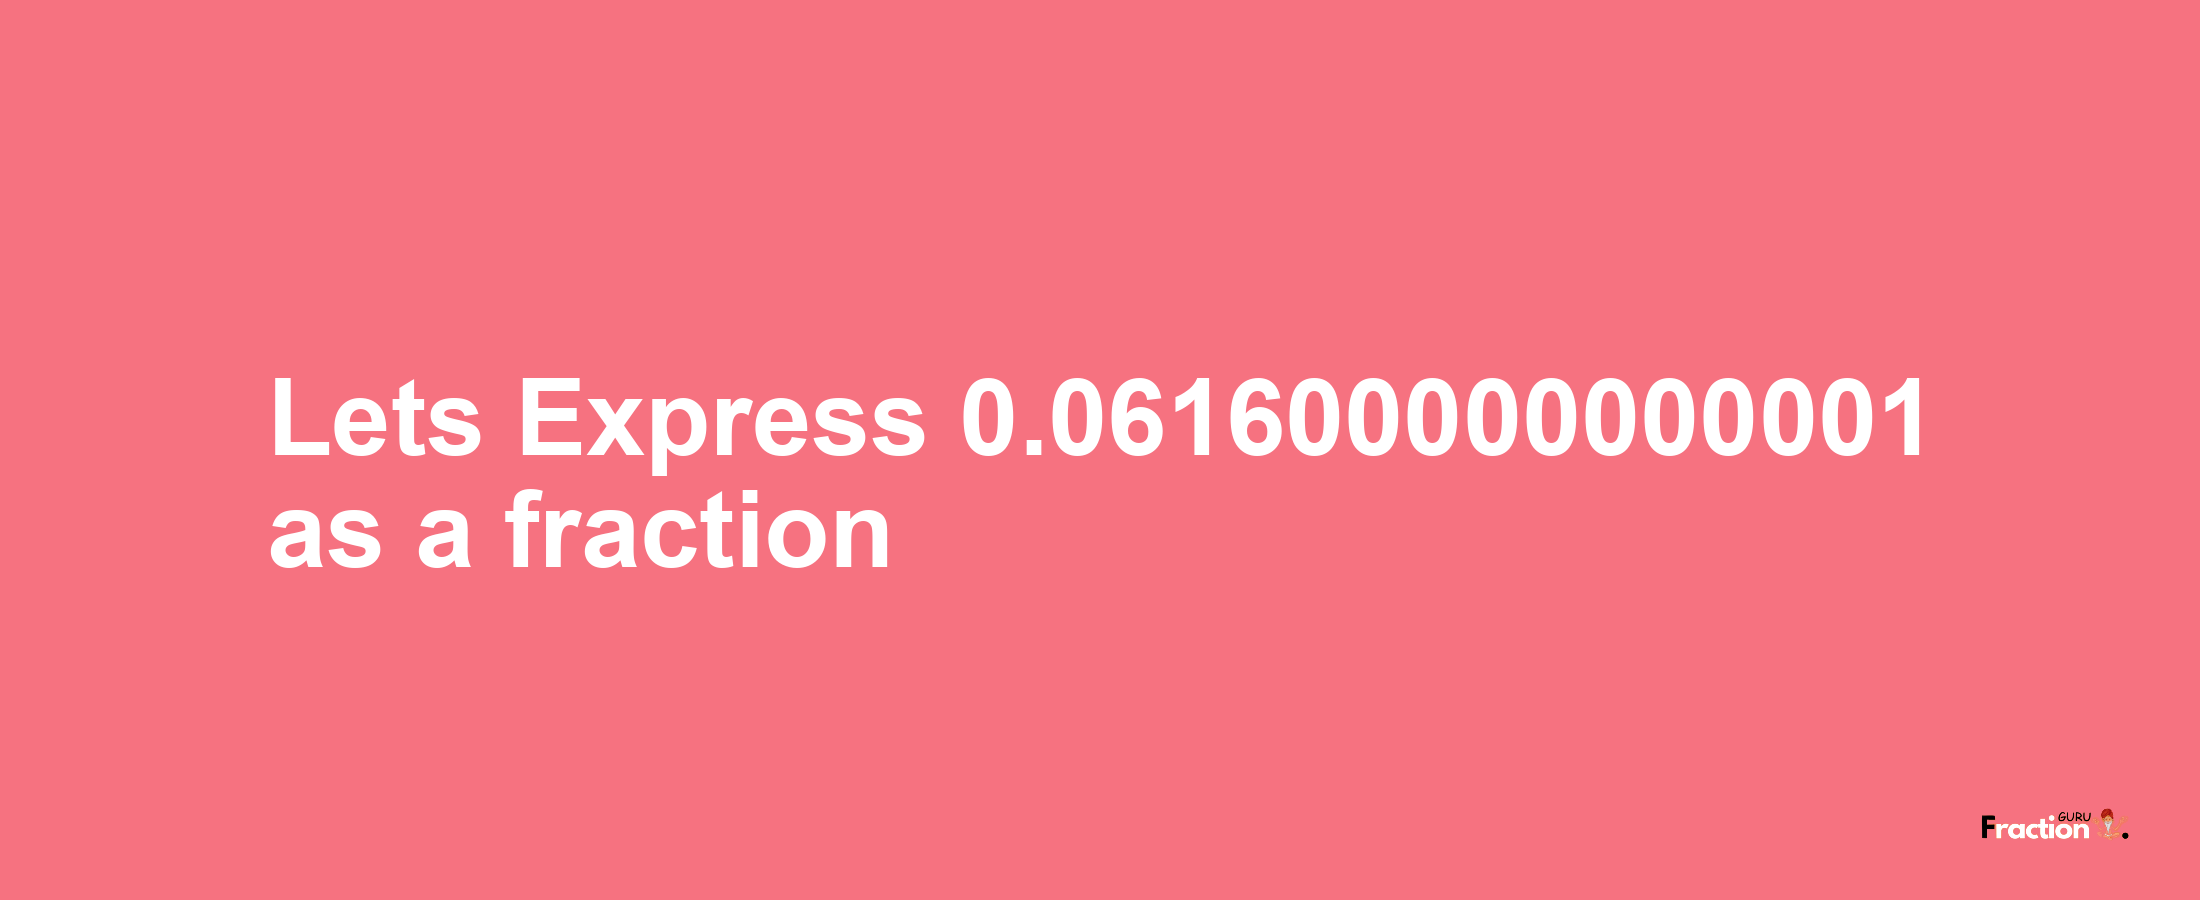 Lets Express 0.061600000000001 as afraction